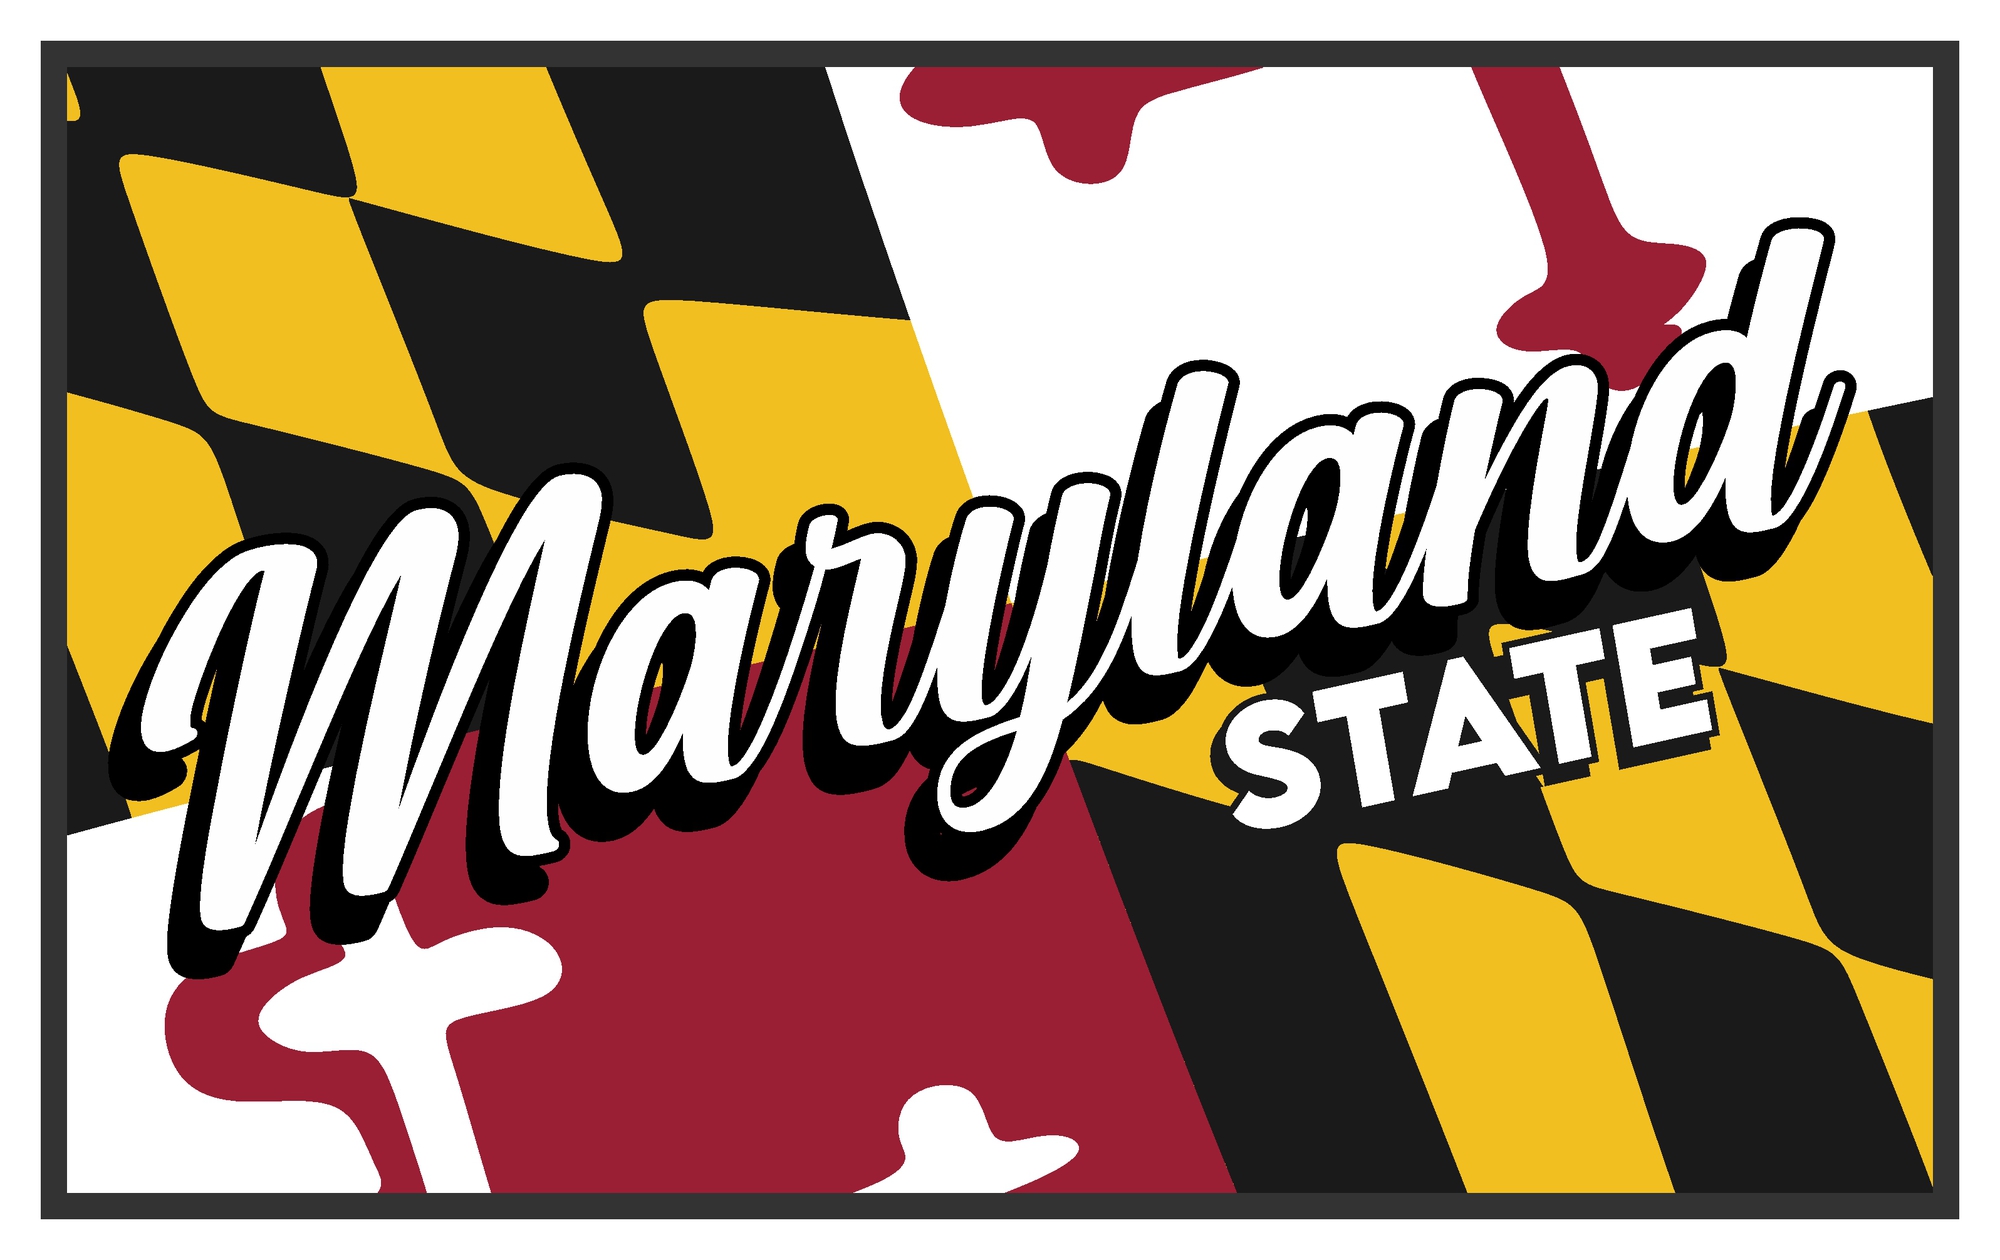 Maryland state logo featured during a festival.